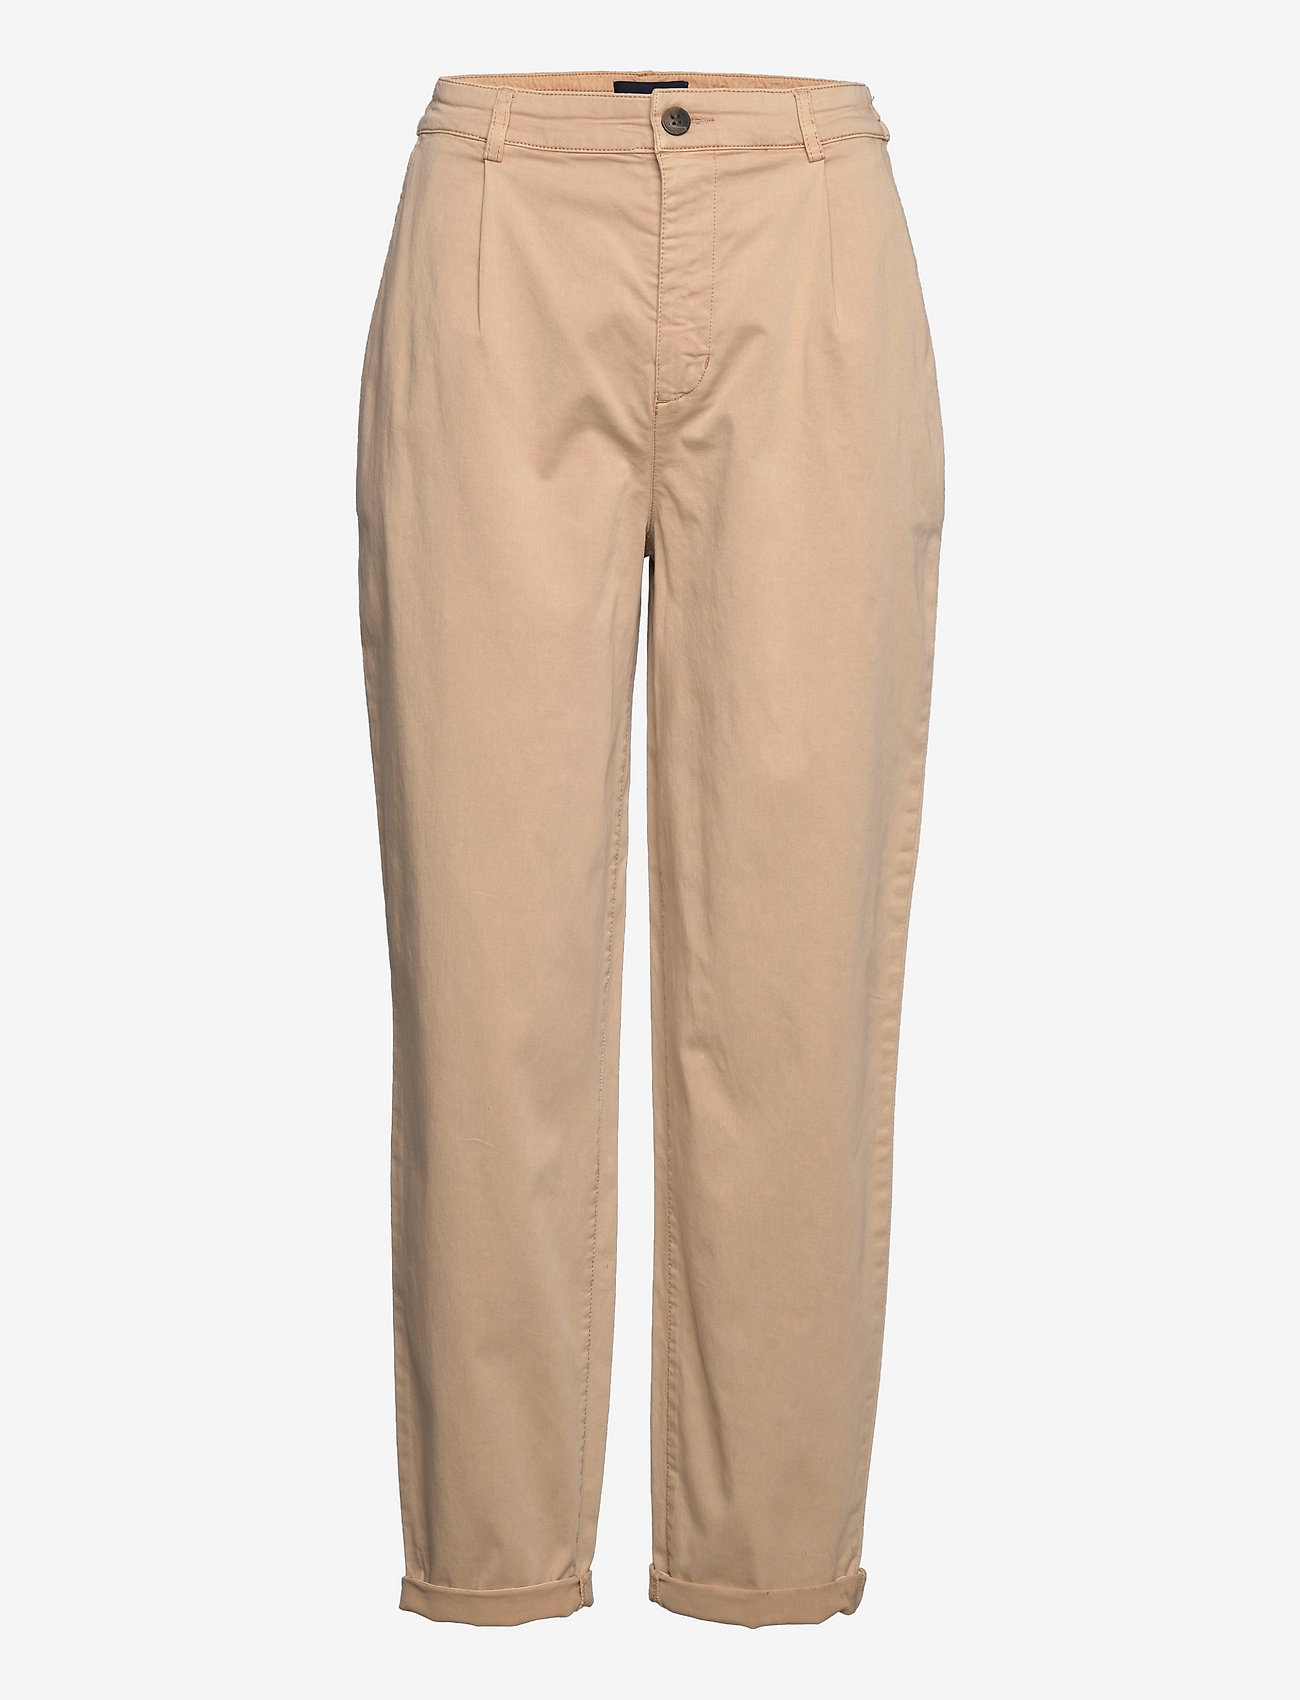 Lexington Clothing - Lilly Cotton/Modal Tapered Pants - chino püksid - beige - 0